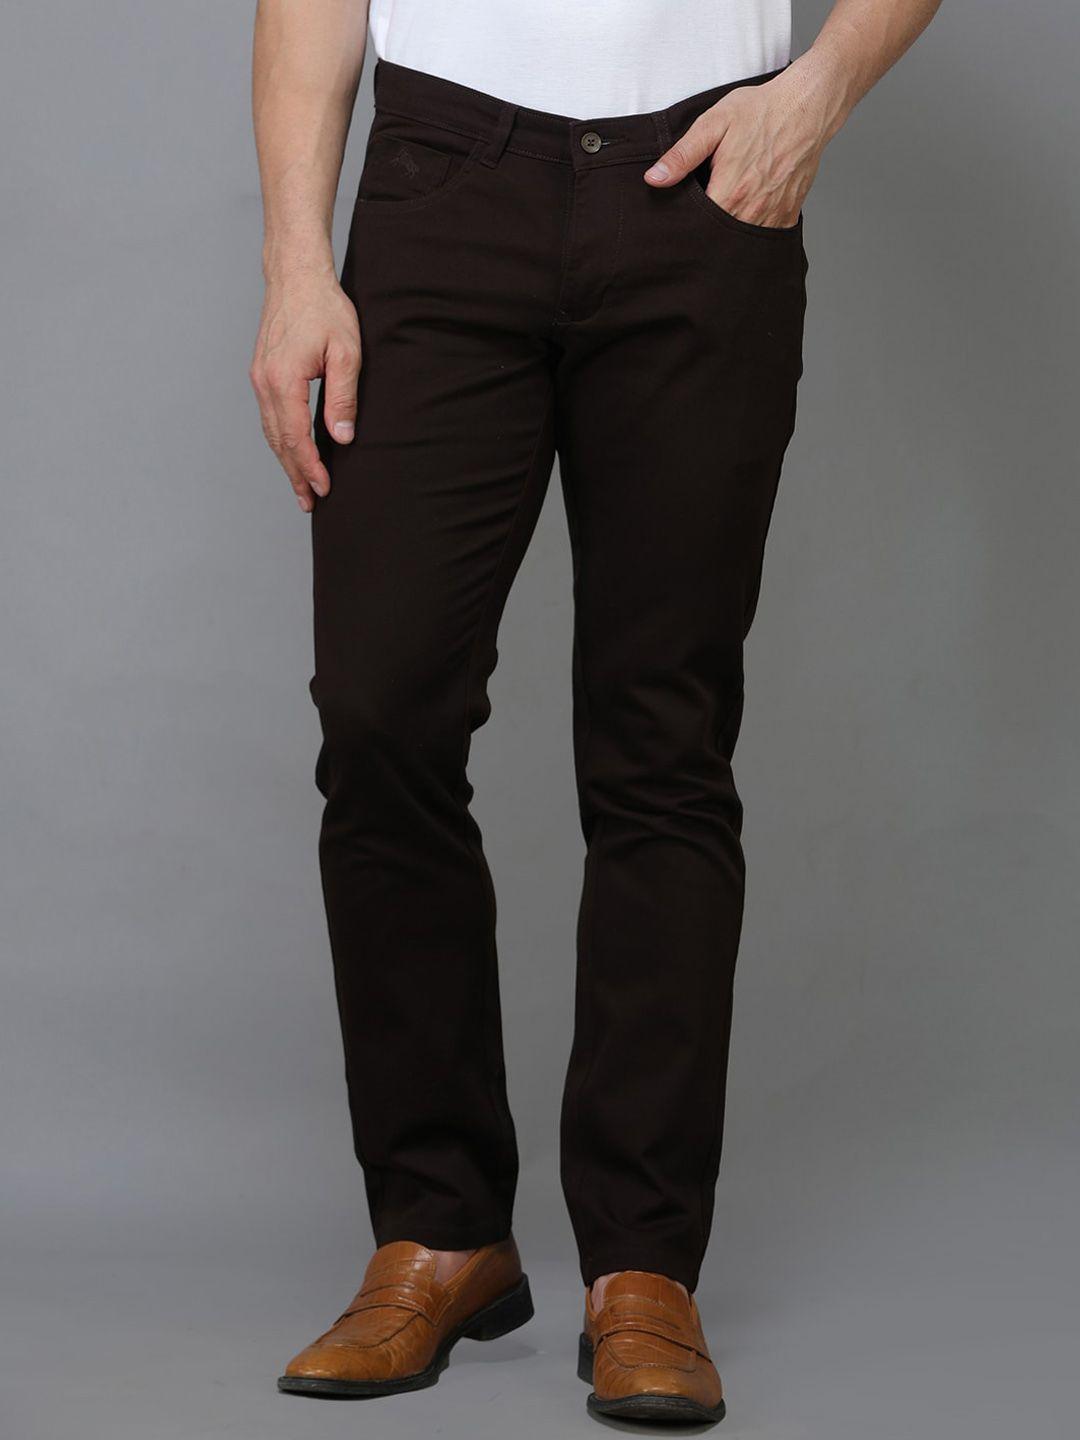 tqs men brown comfort chinos trousers